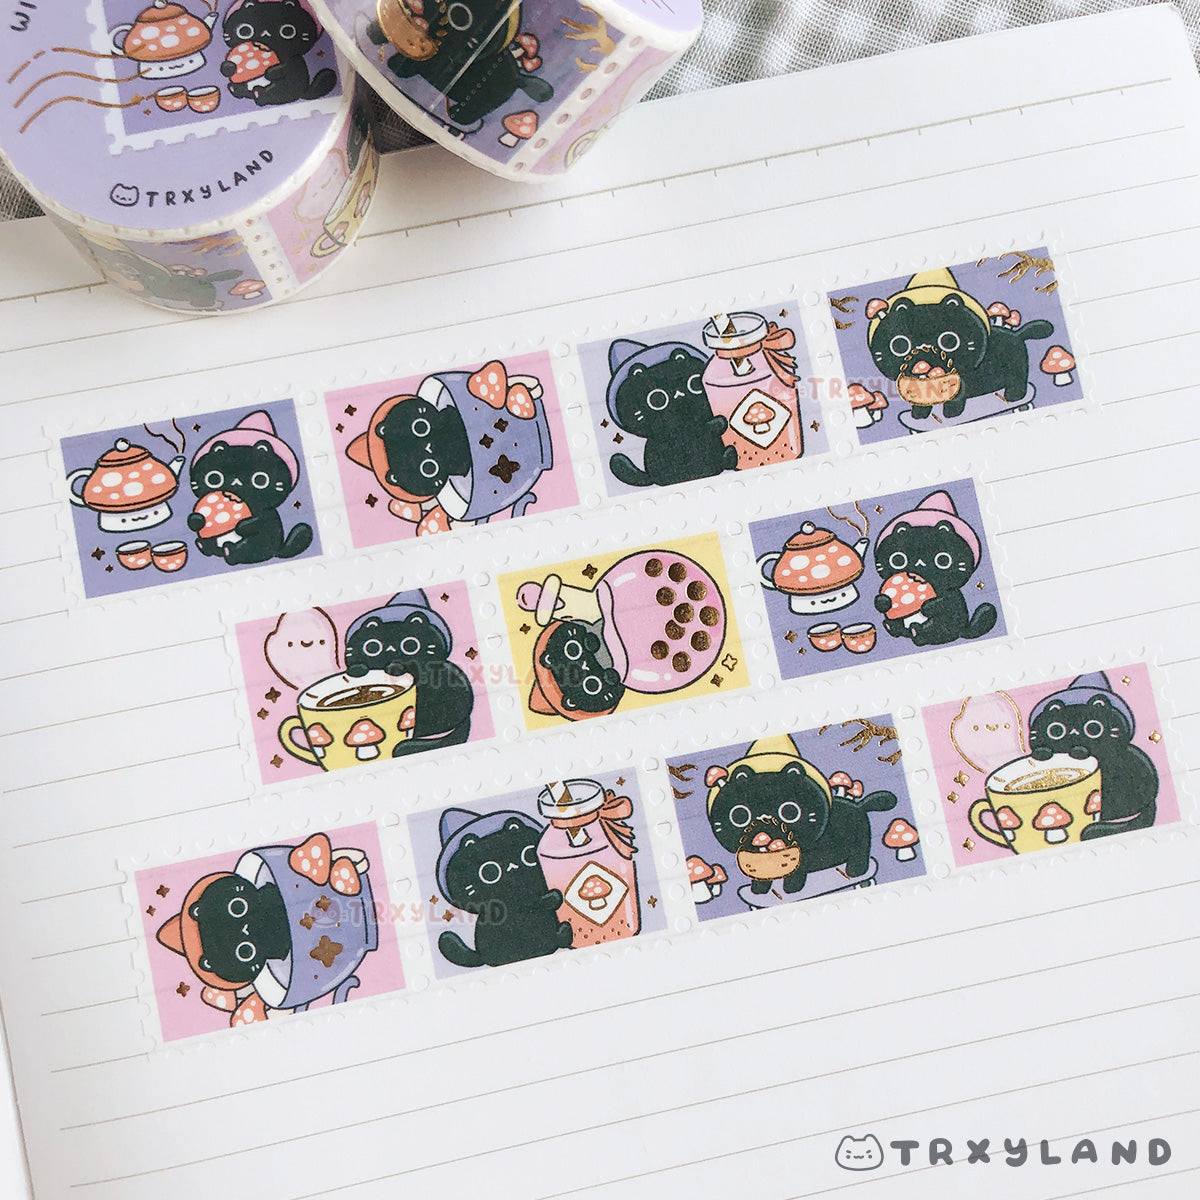 Witchy Kitty Series SUPER Bundle - 3 Enamel Pins + Foil Stamp Washi Tape